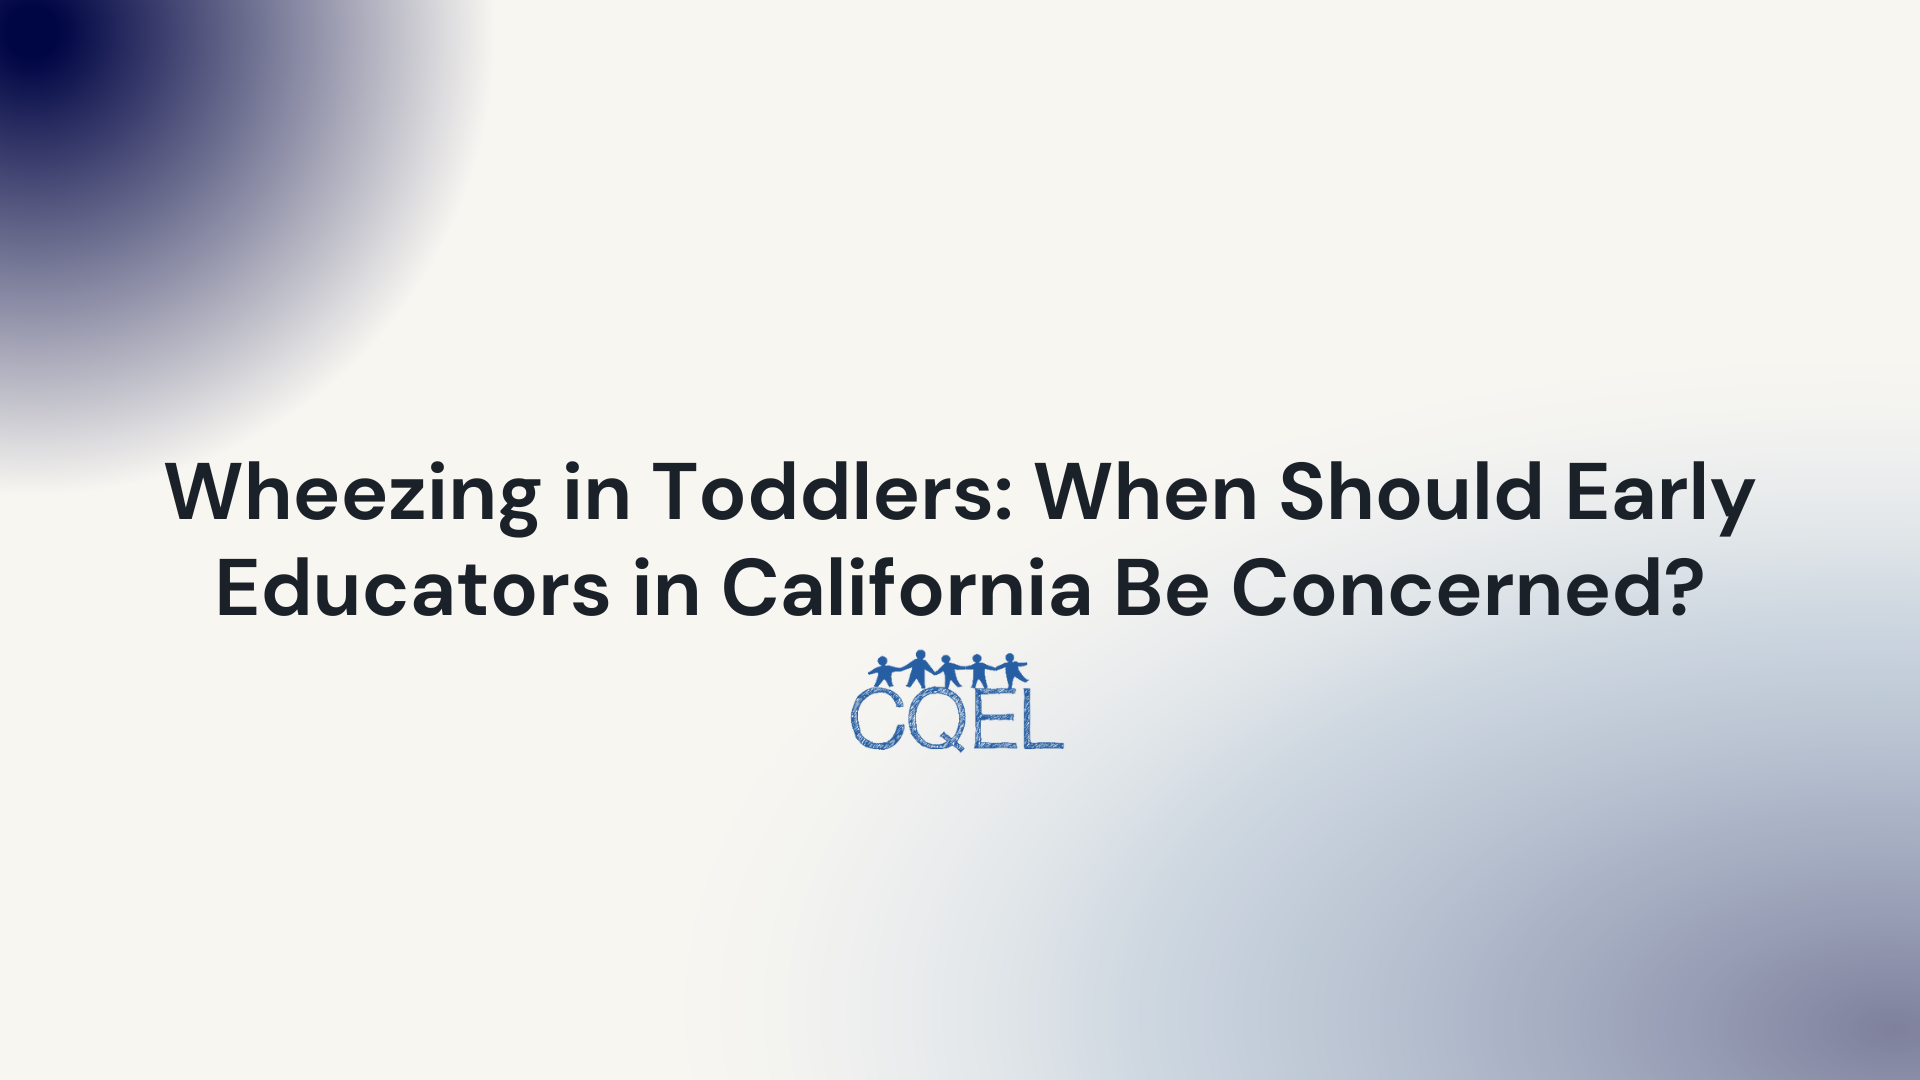 Wheezing in Toddlers: When Should Early Educators in California Be Concerned?